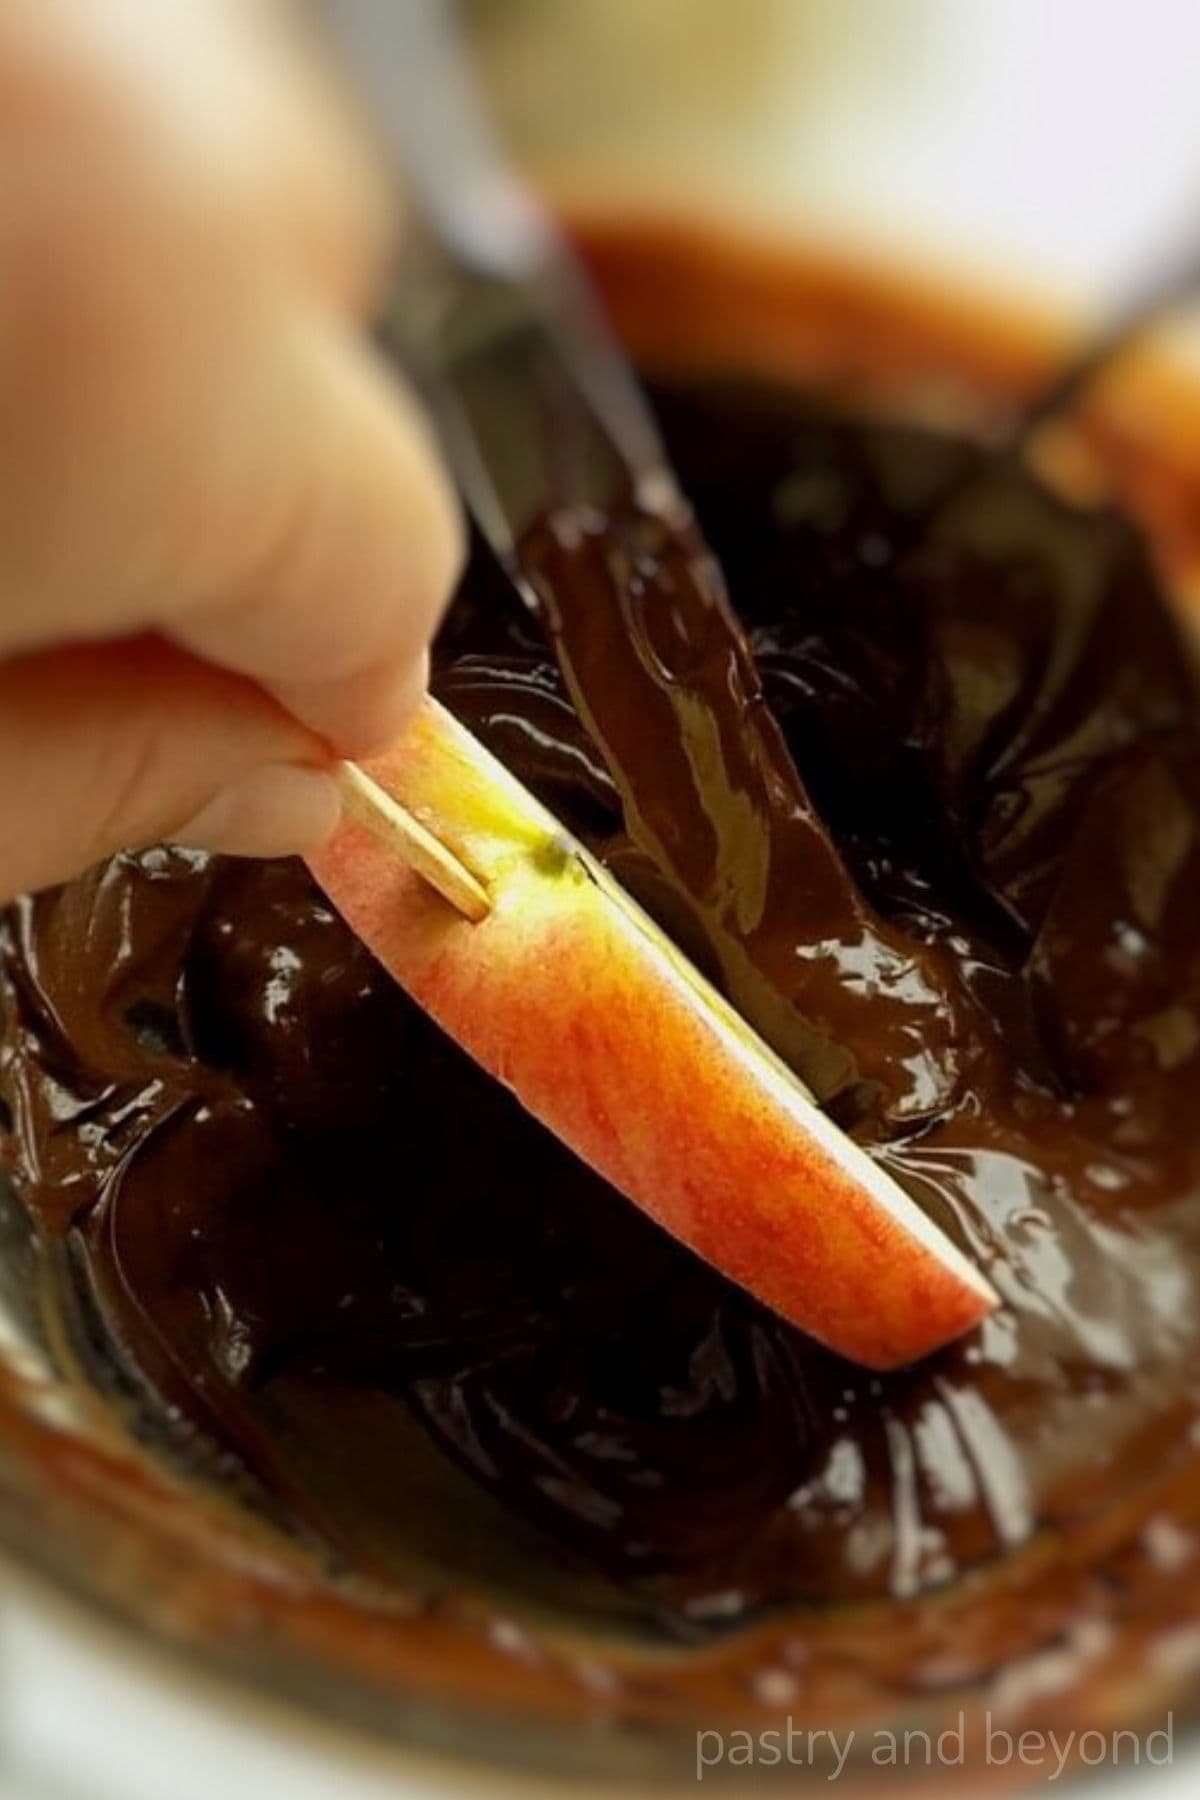 Dipping the apple into melted chocolate.